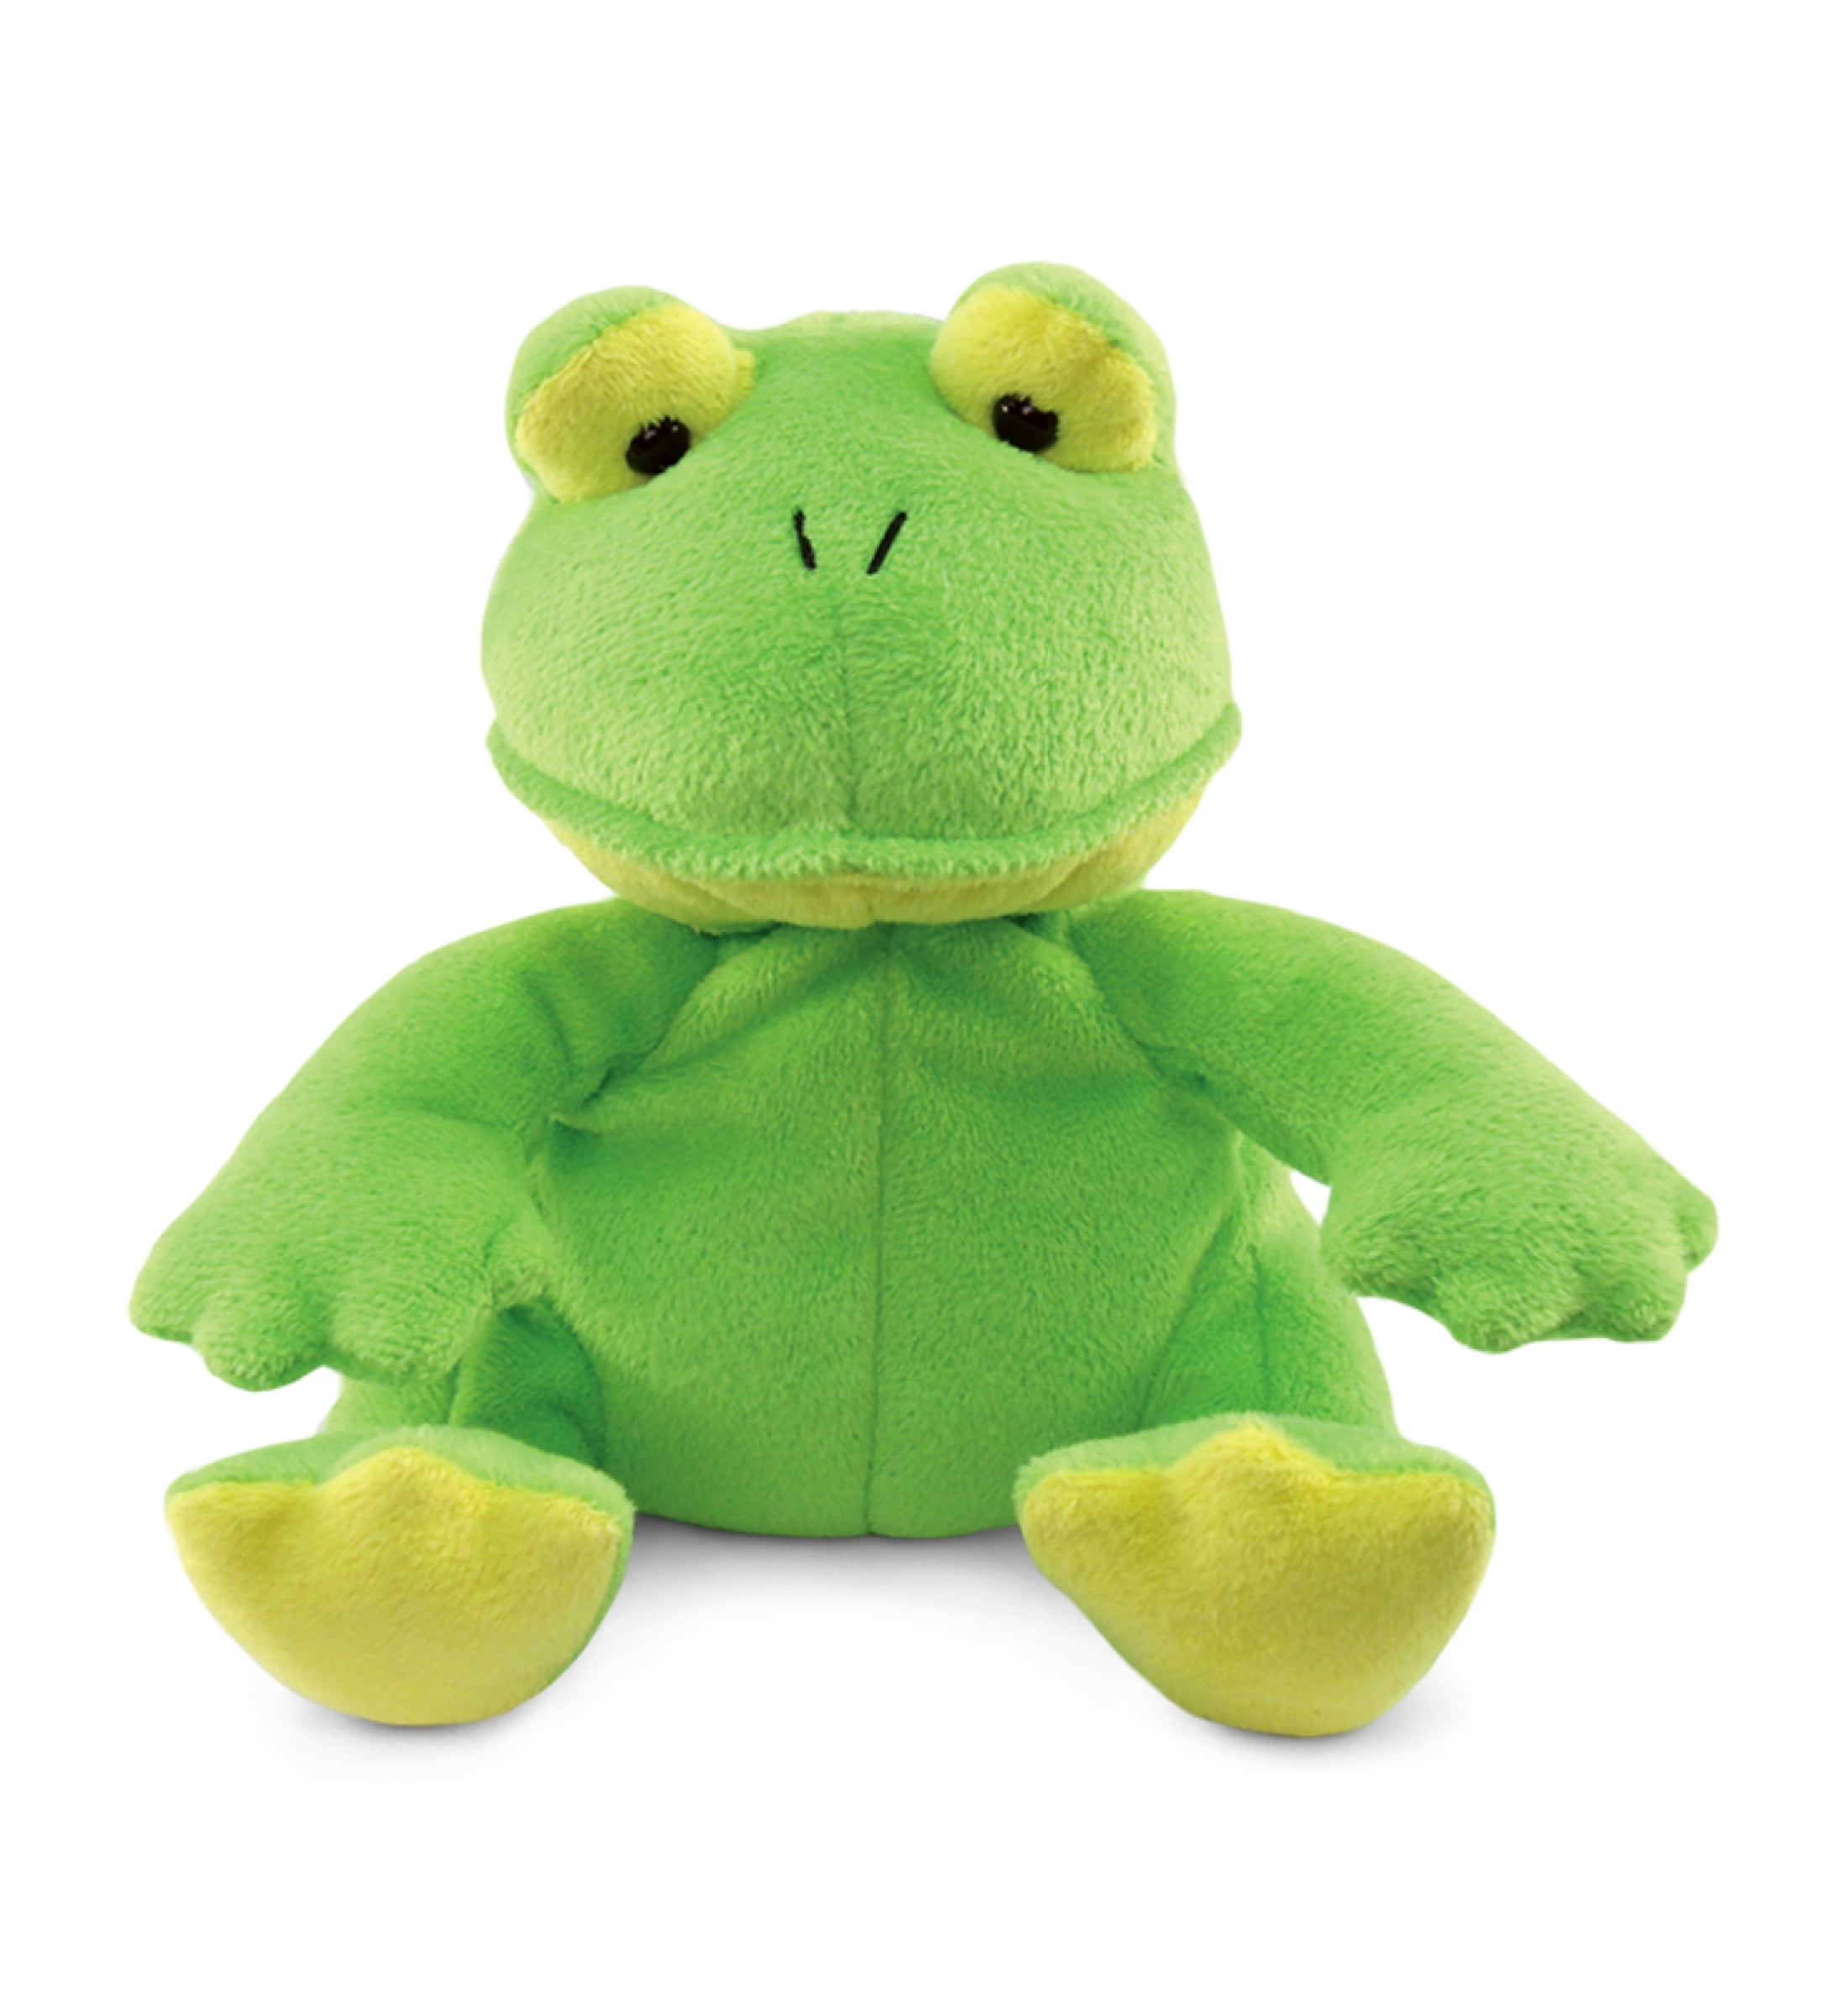 DolliBu Plush Frog Stuffed Animal - Soft Huggable Sitting Green Frog,  Adorable Playtime Frog Plush Toy, Cute Rain Forest Life Cuddle Gift, Super  Soft Plush Doll Animal Toy for Kids & Adults - 6 Inch 